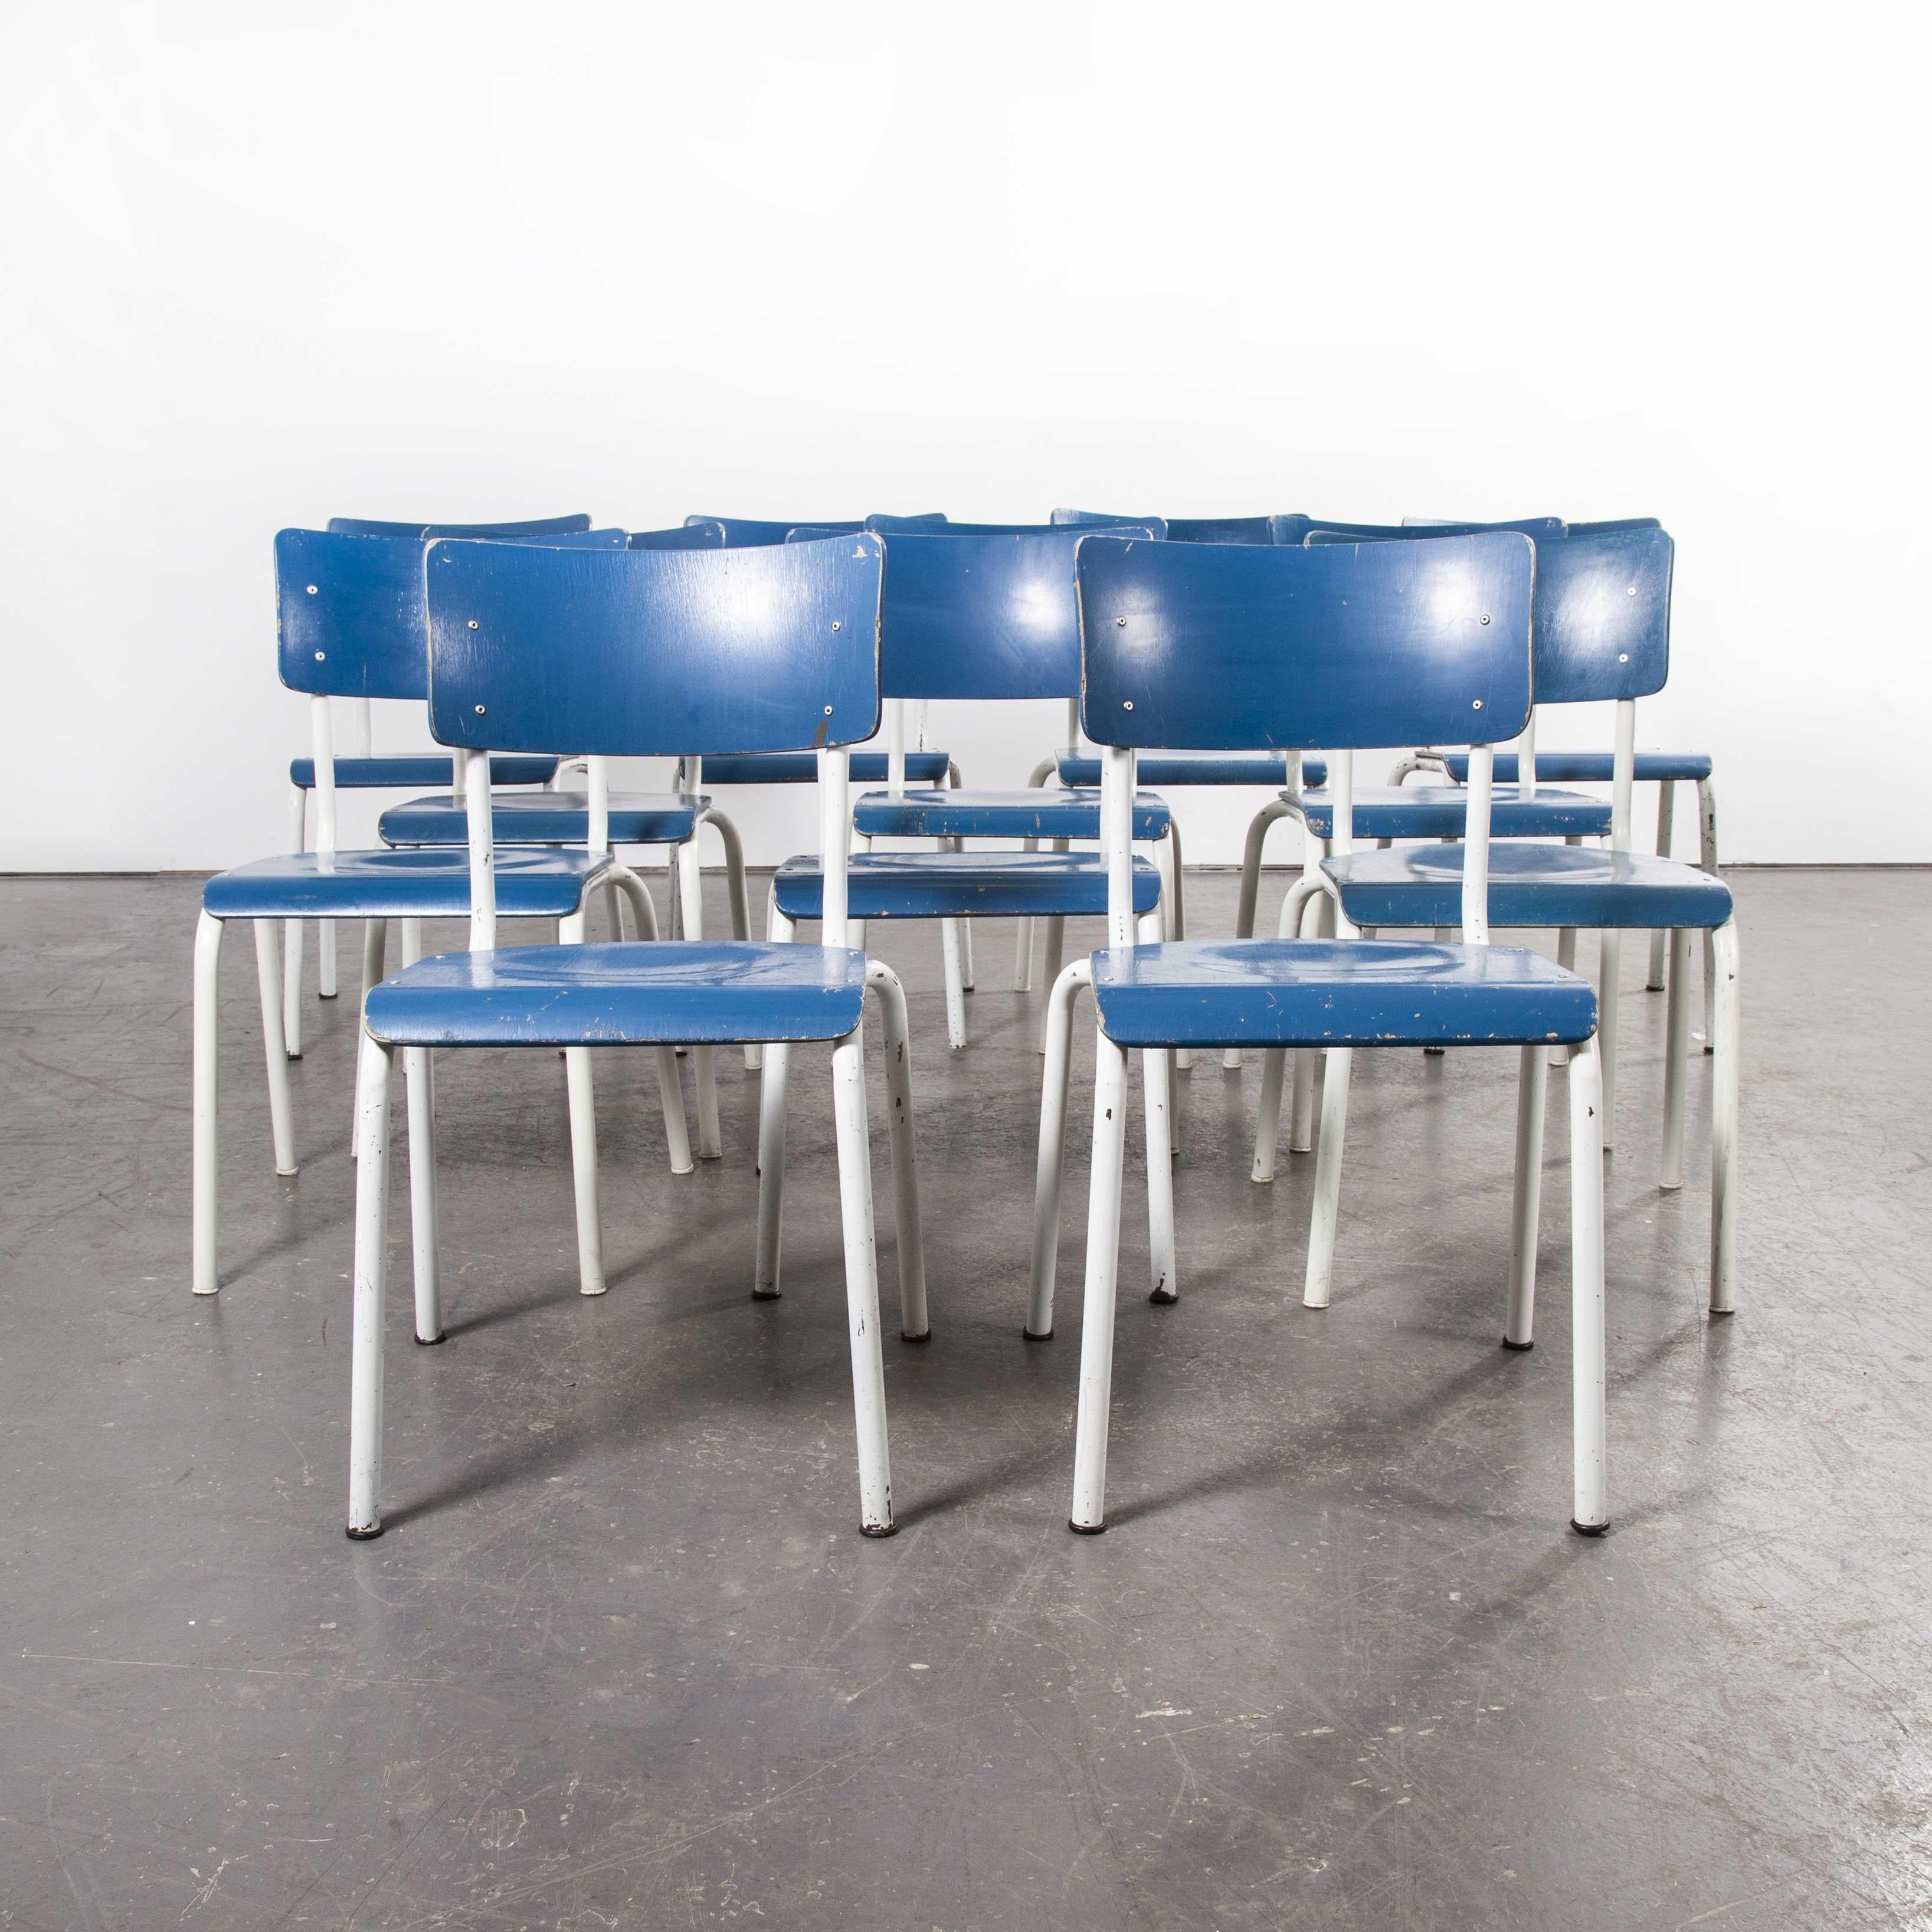 1970s Stacking Dining Chairs for the German Military, Blue, Set of Twelve 1